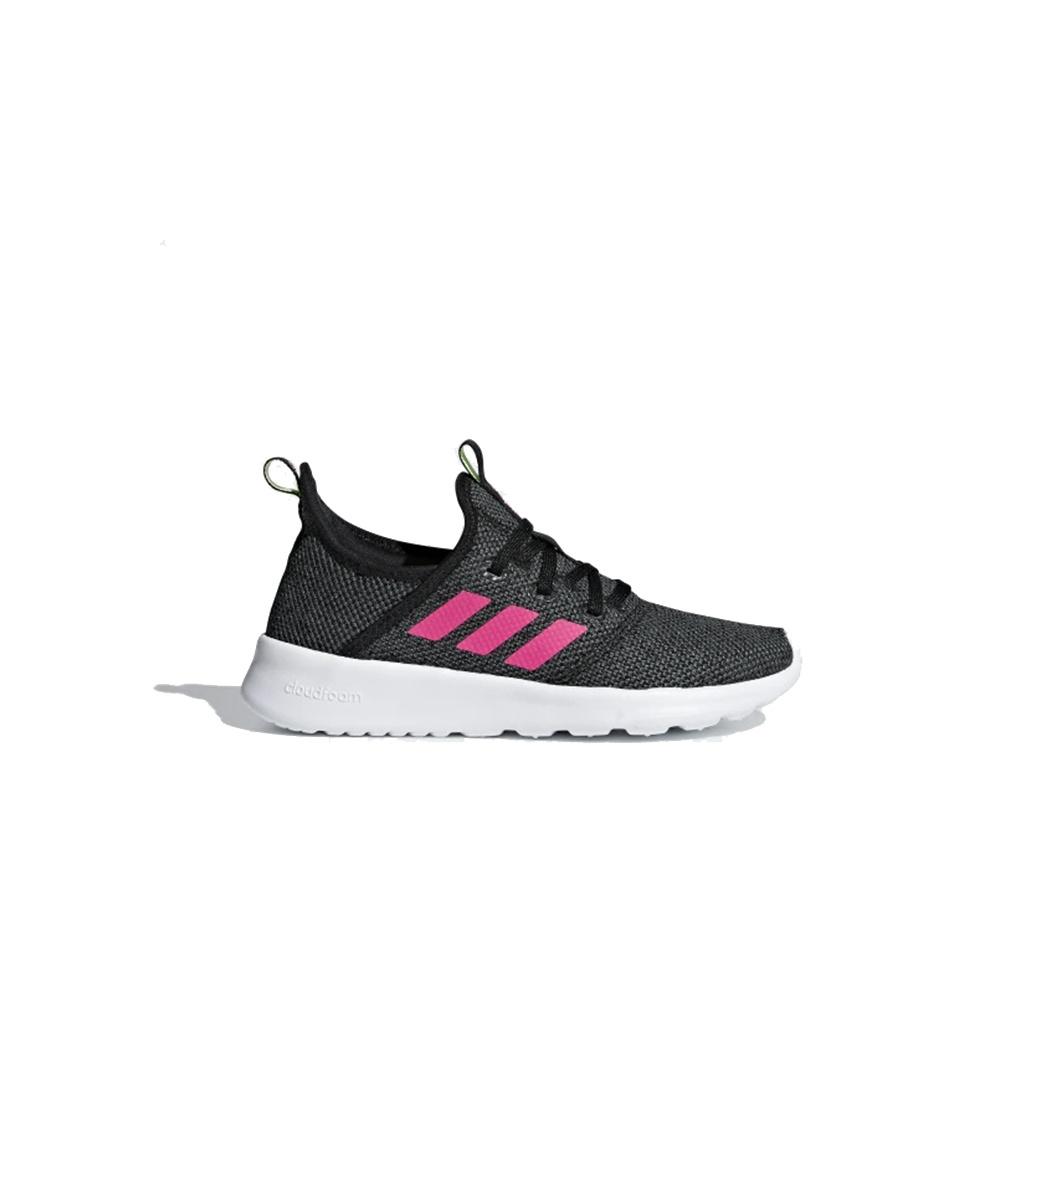 adidas cloudfoam pink and black